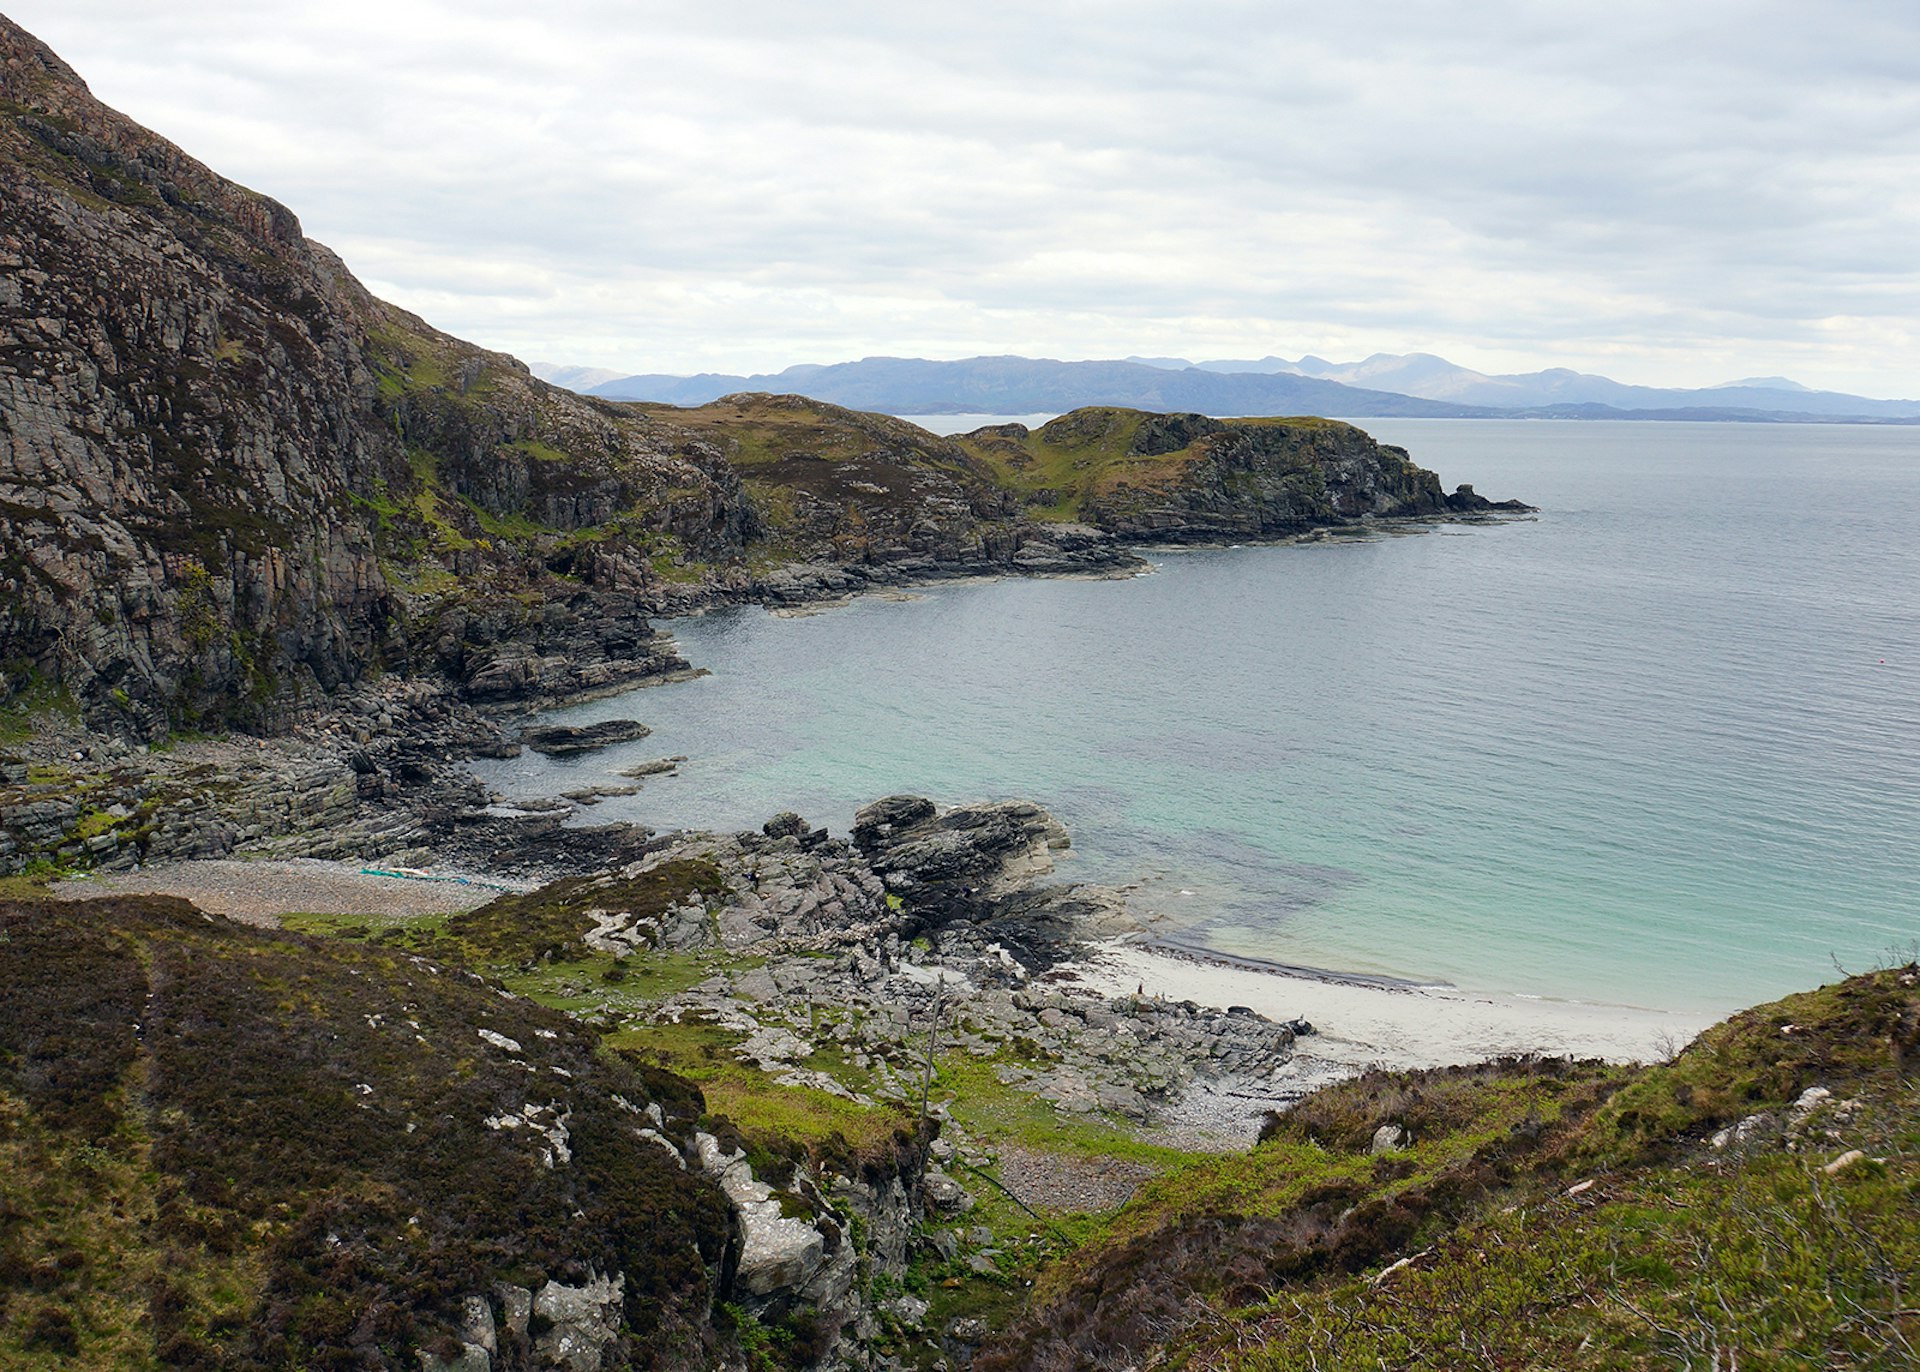 One of several remote bays on the coast of Sleat, Isle of Skye © James Kay / Lonely Planet